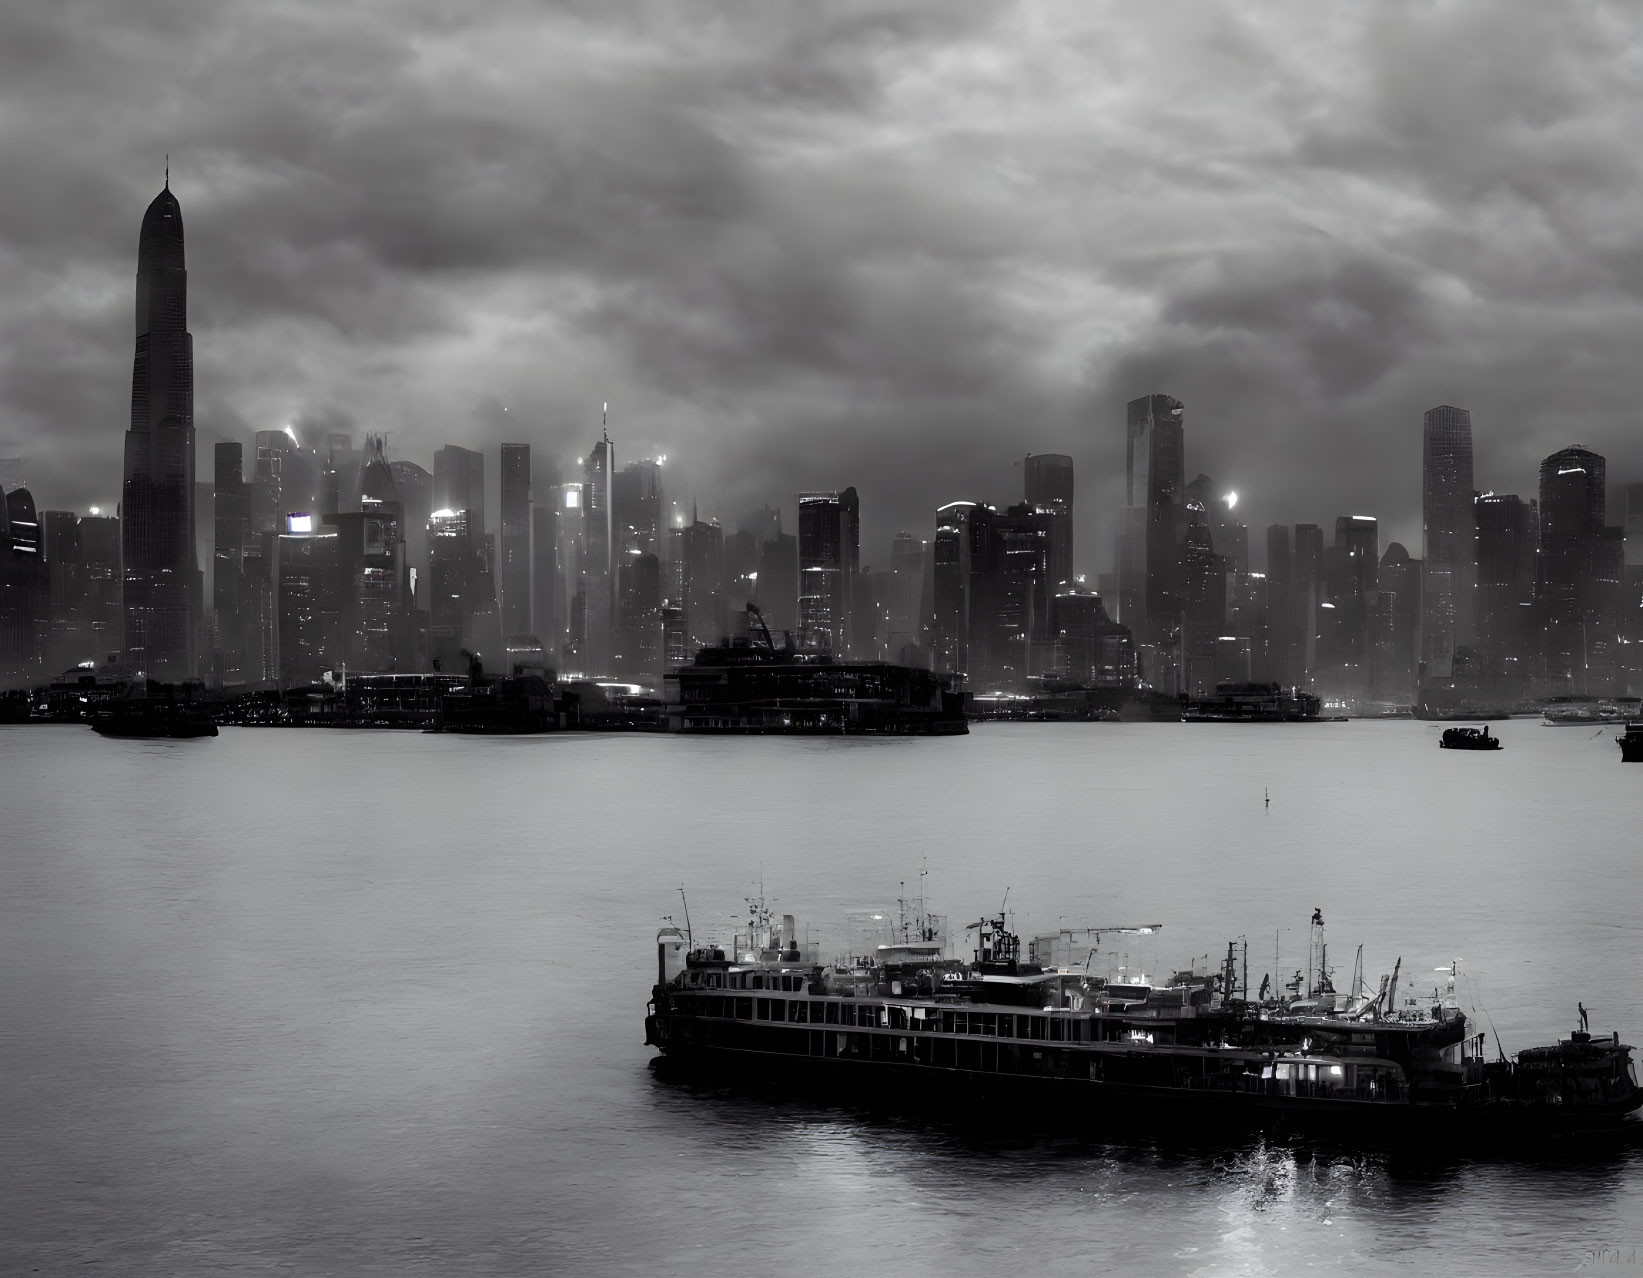 Monochrome cityscape at dusk with illuminated skyscrapers and ferry on river